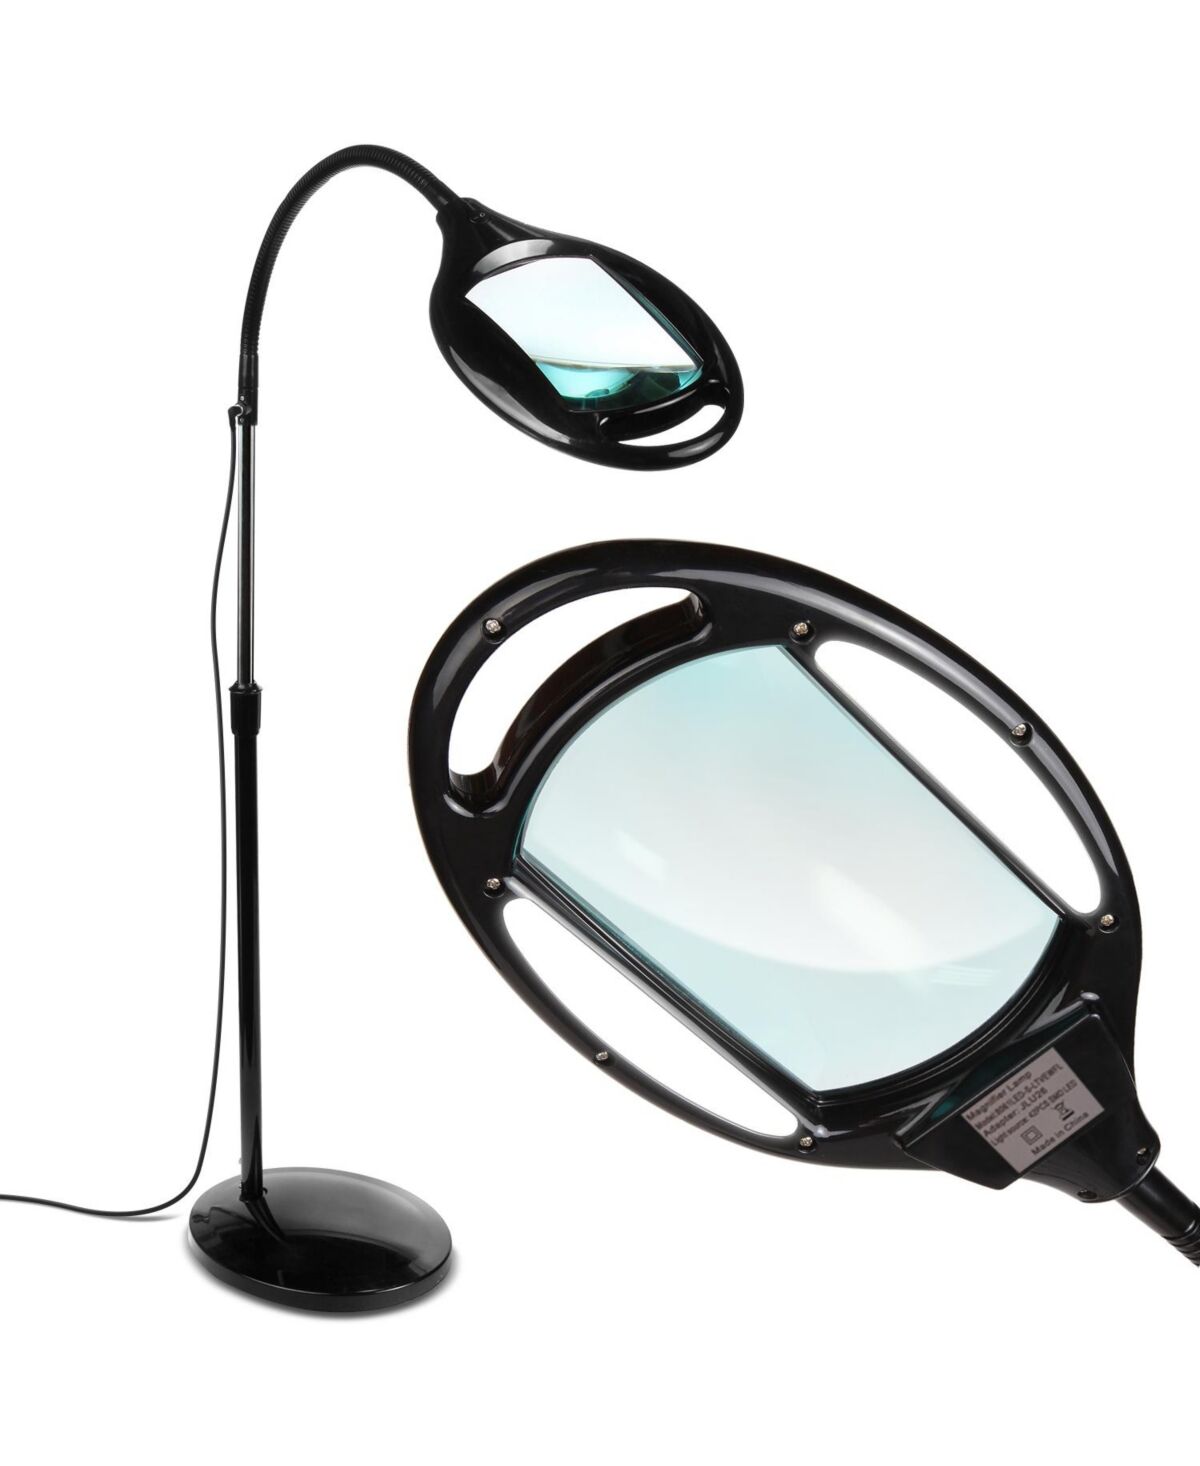 Brightech Lightview Pro Led Gooseneck Standing Magnifier Floor Lamp - (2.25x) 5 Diopter - Classic Black